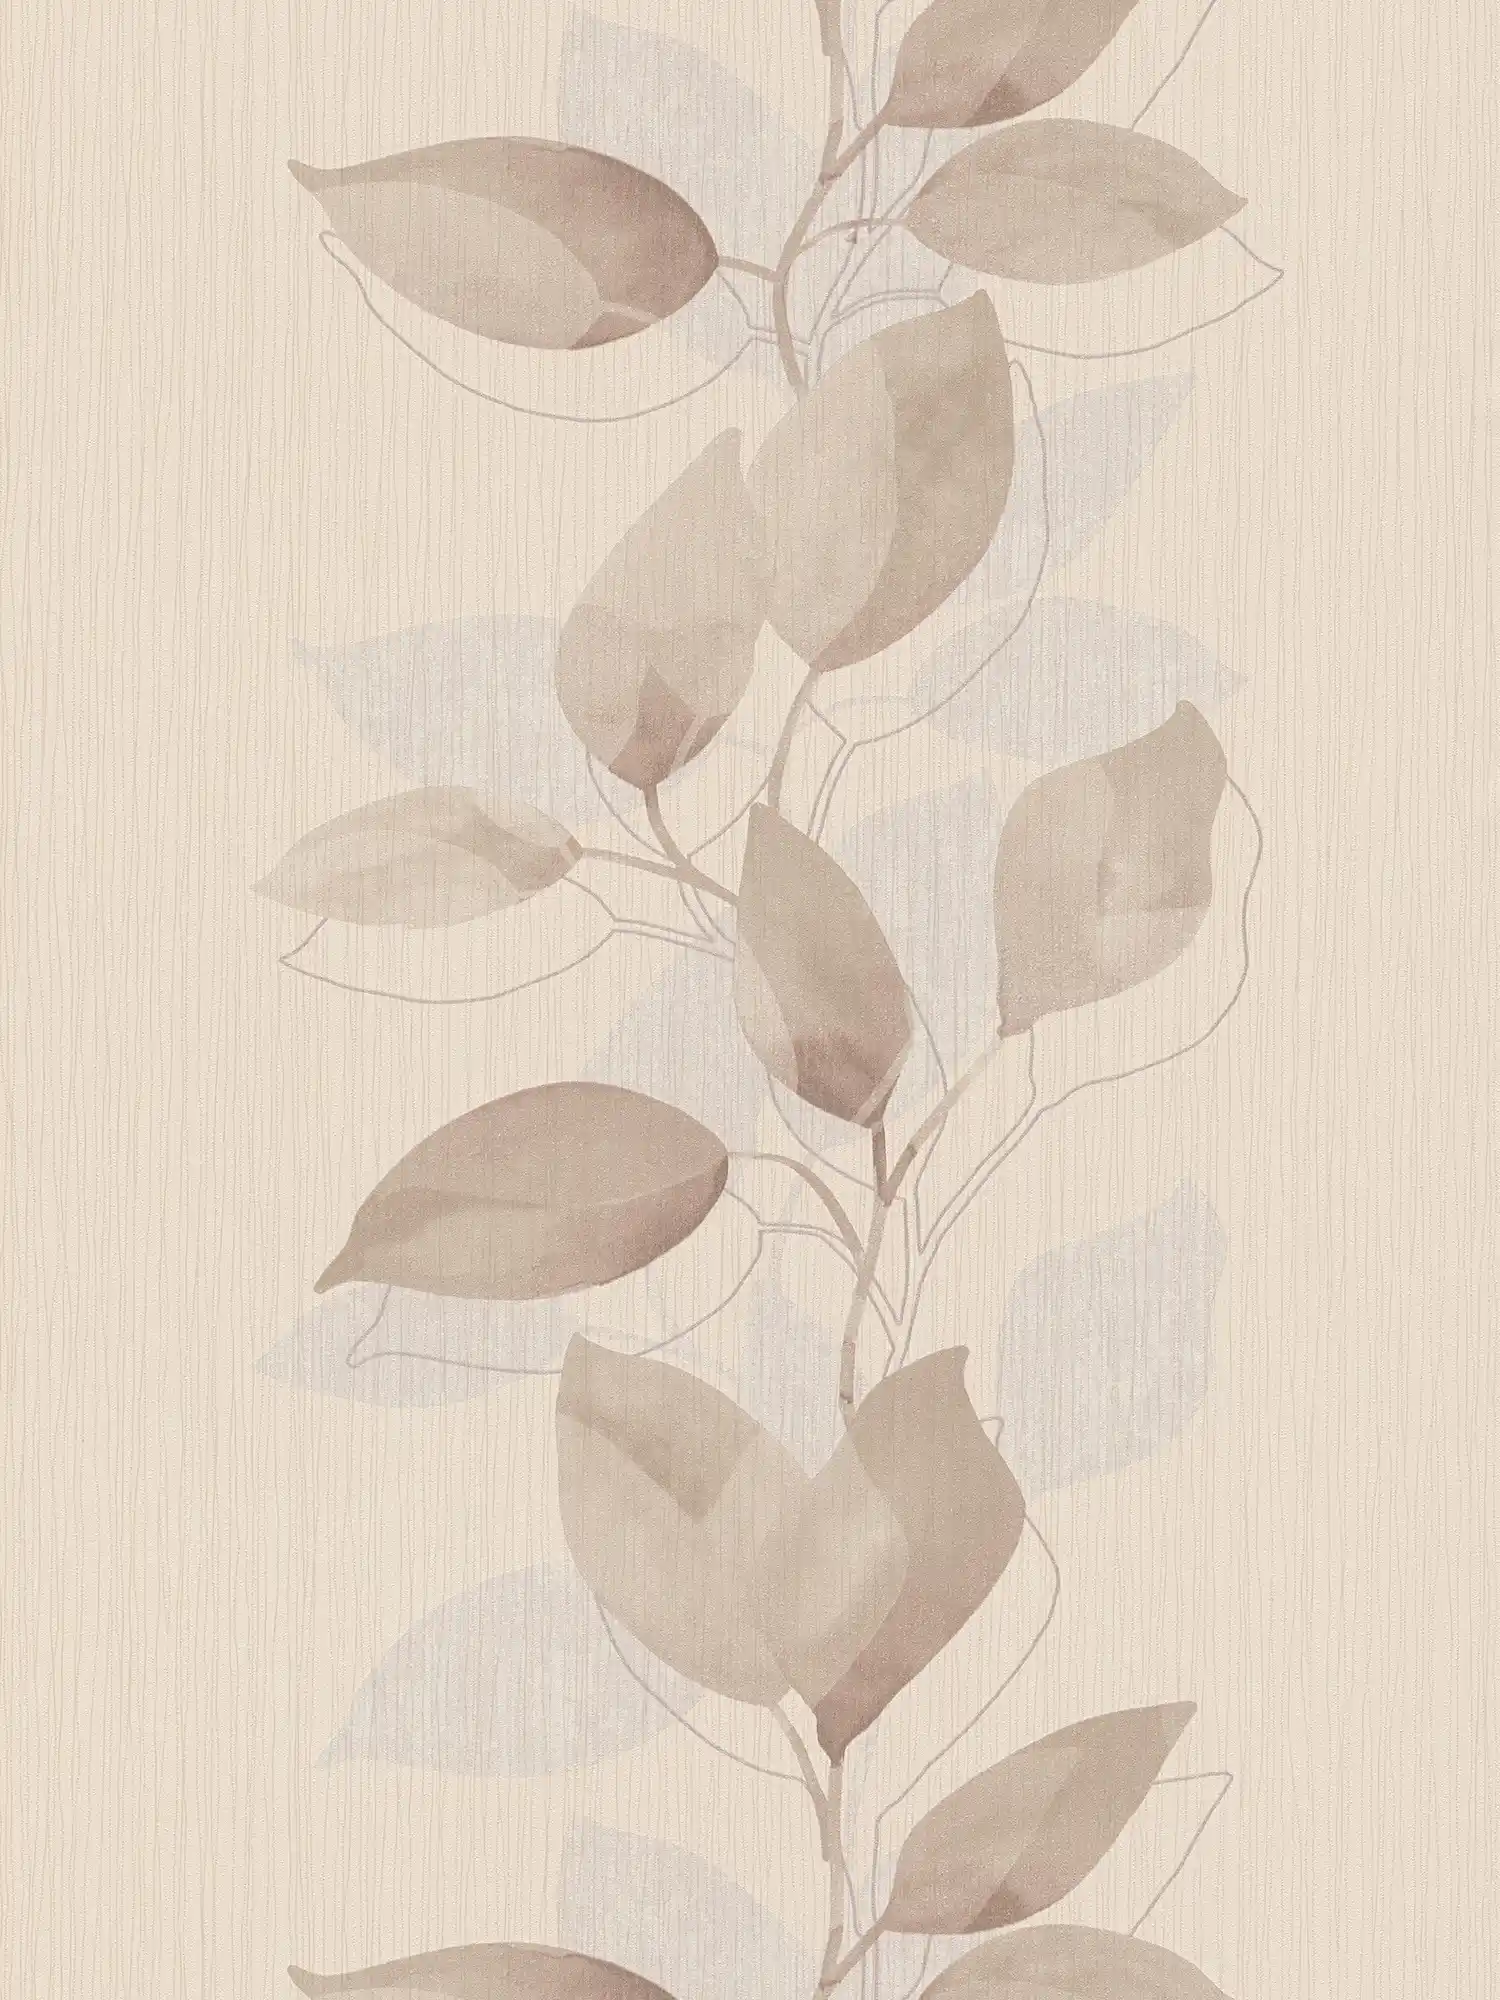 Nature leaves wallpaper with tendril pattern - beige
